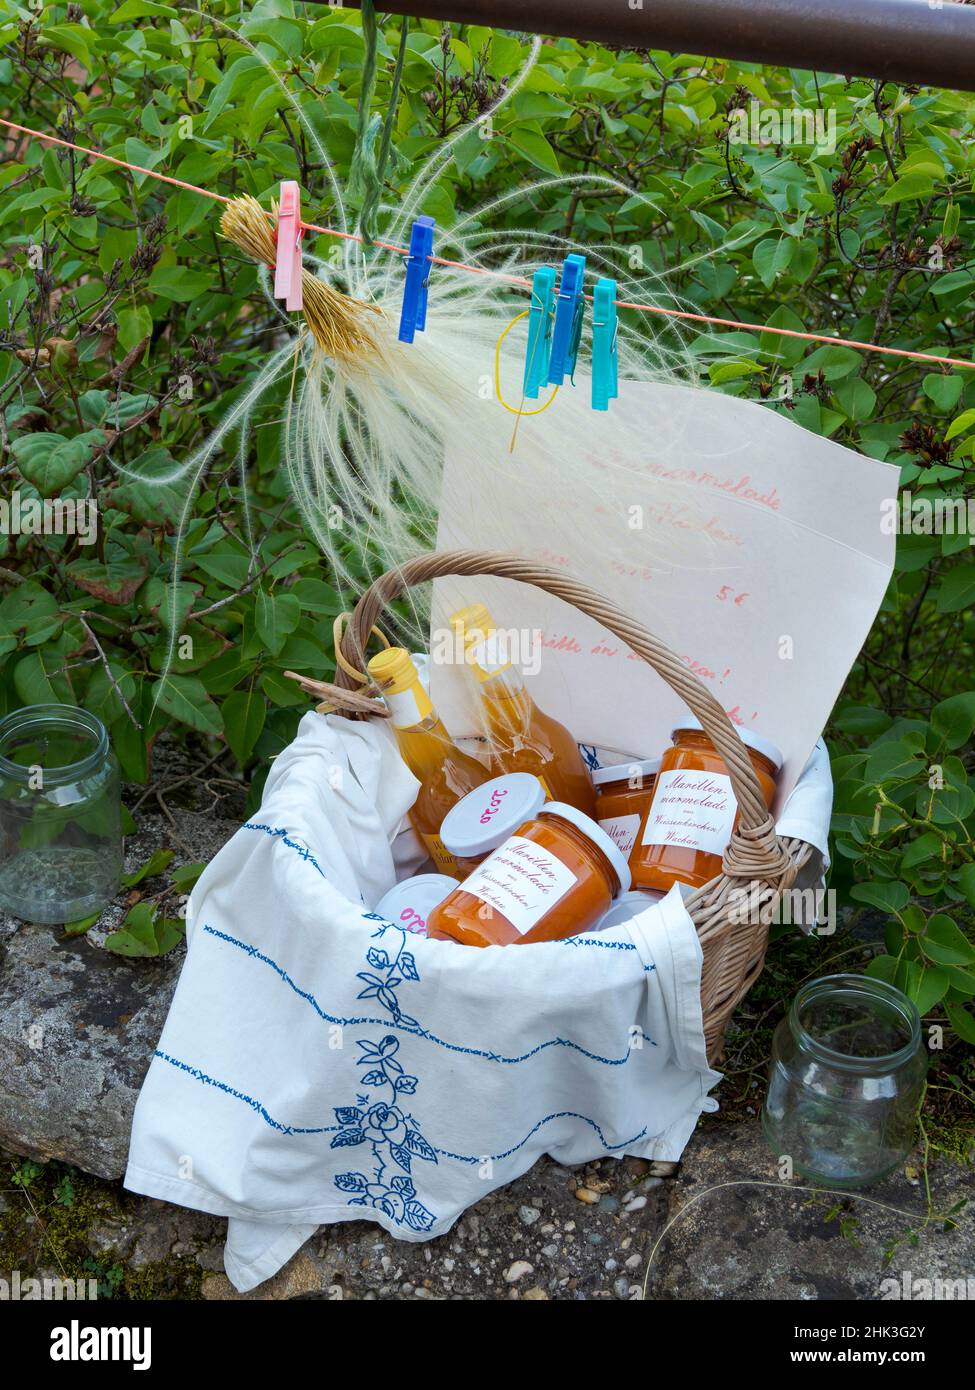 Local apricot jam and sand grass (Steinfeder) used for decorating traditional hats. Historic village Weissenkirchen located in wine-growing area, UNES Stock Photo